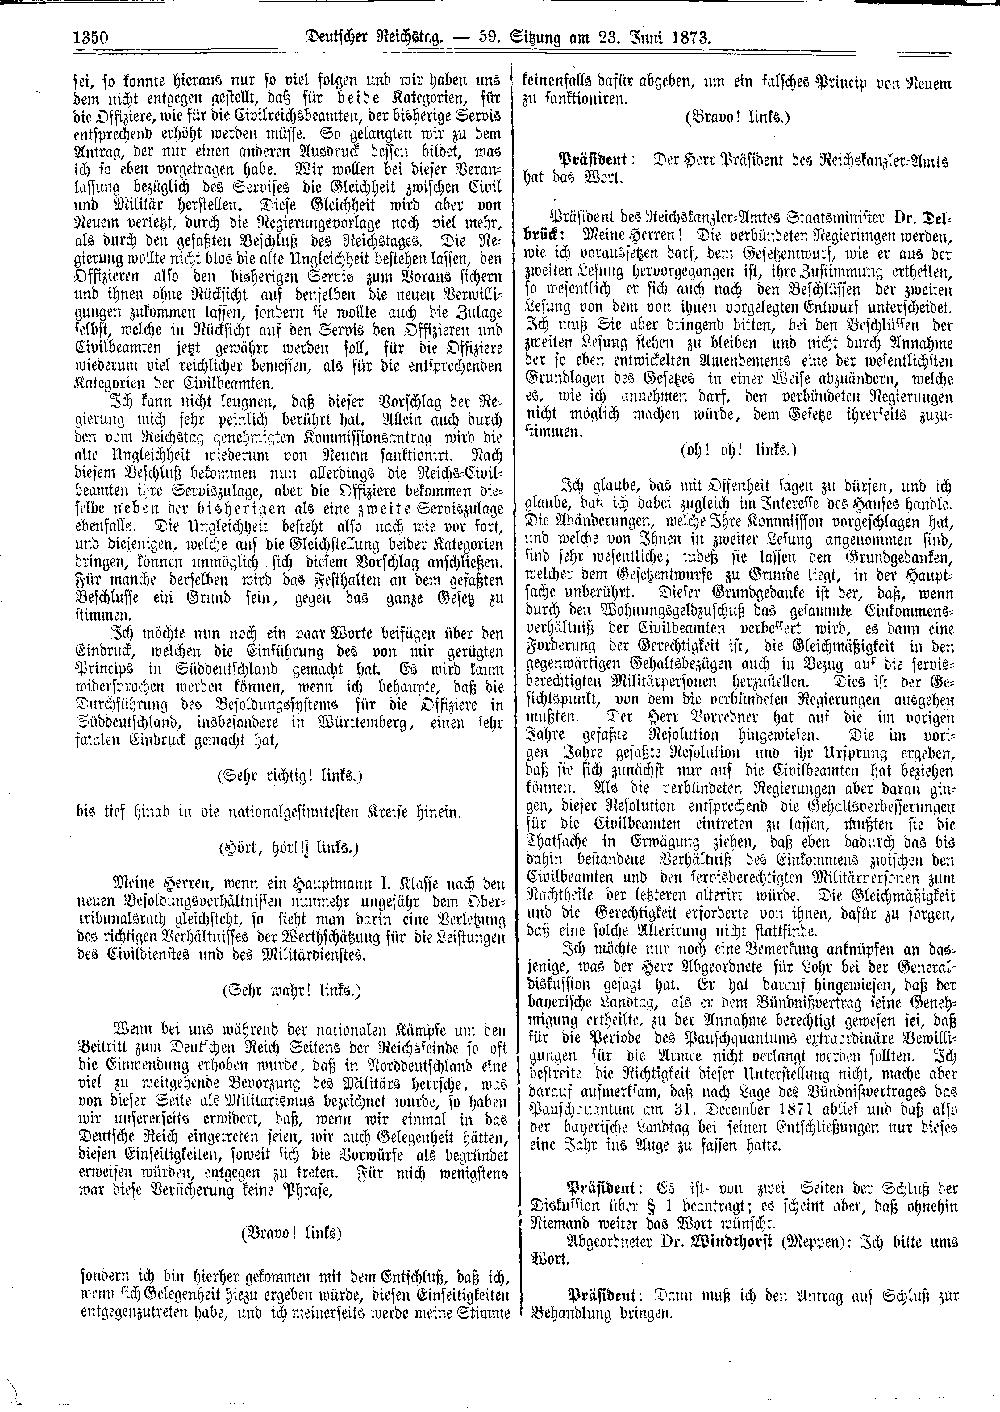 Scan of page 1350